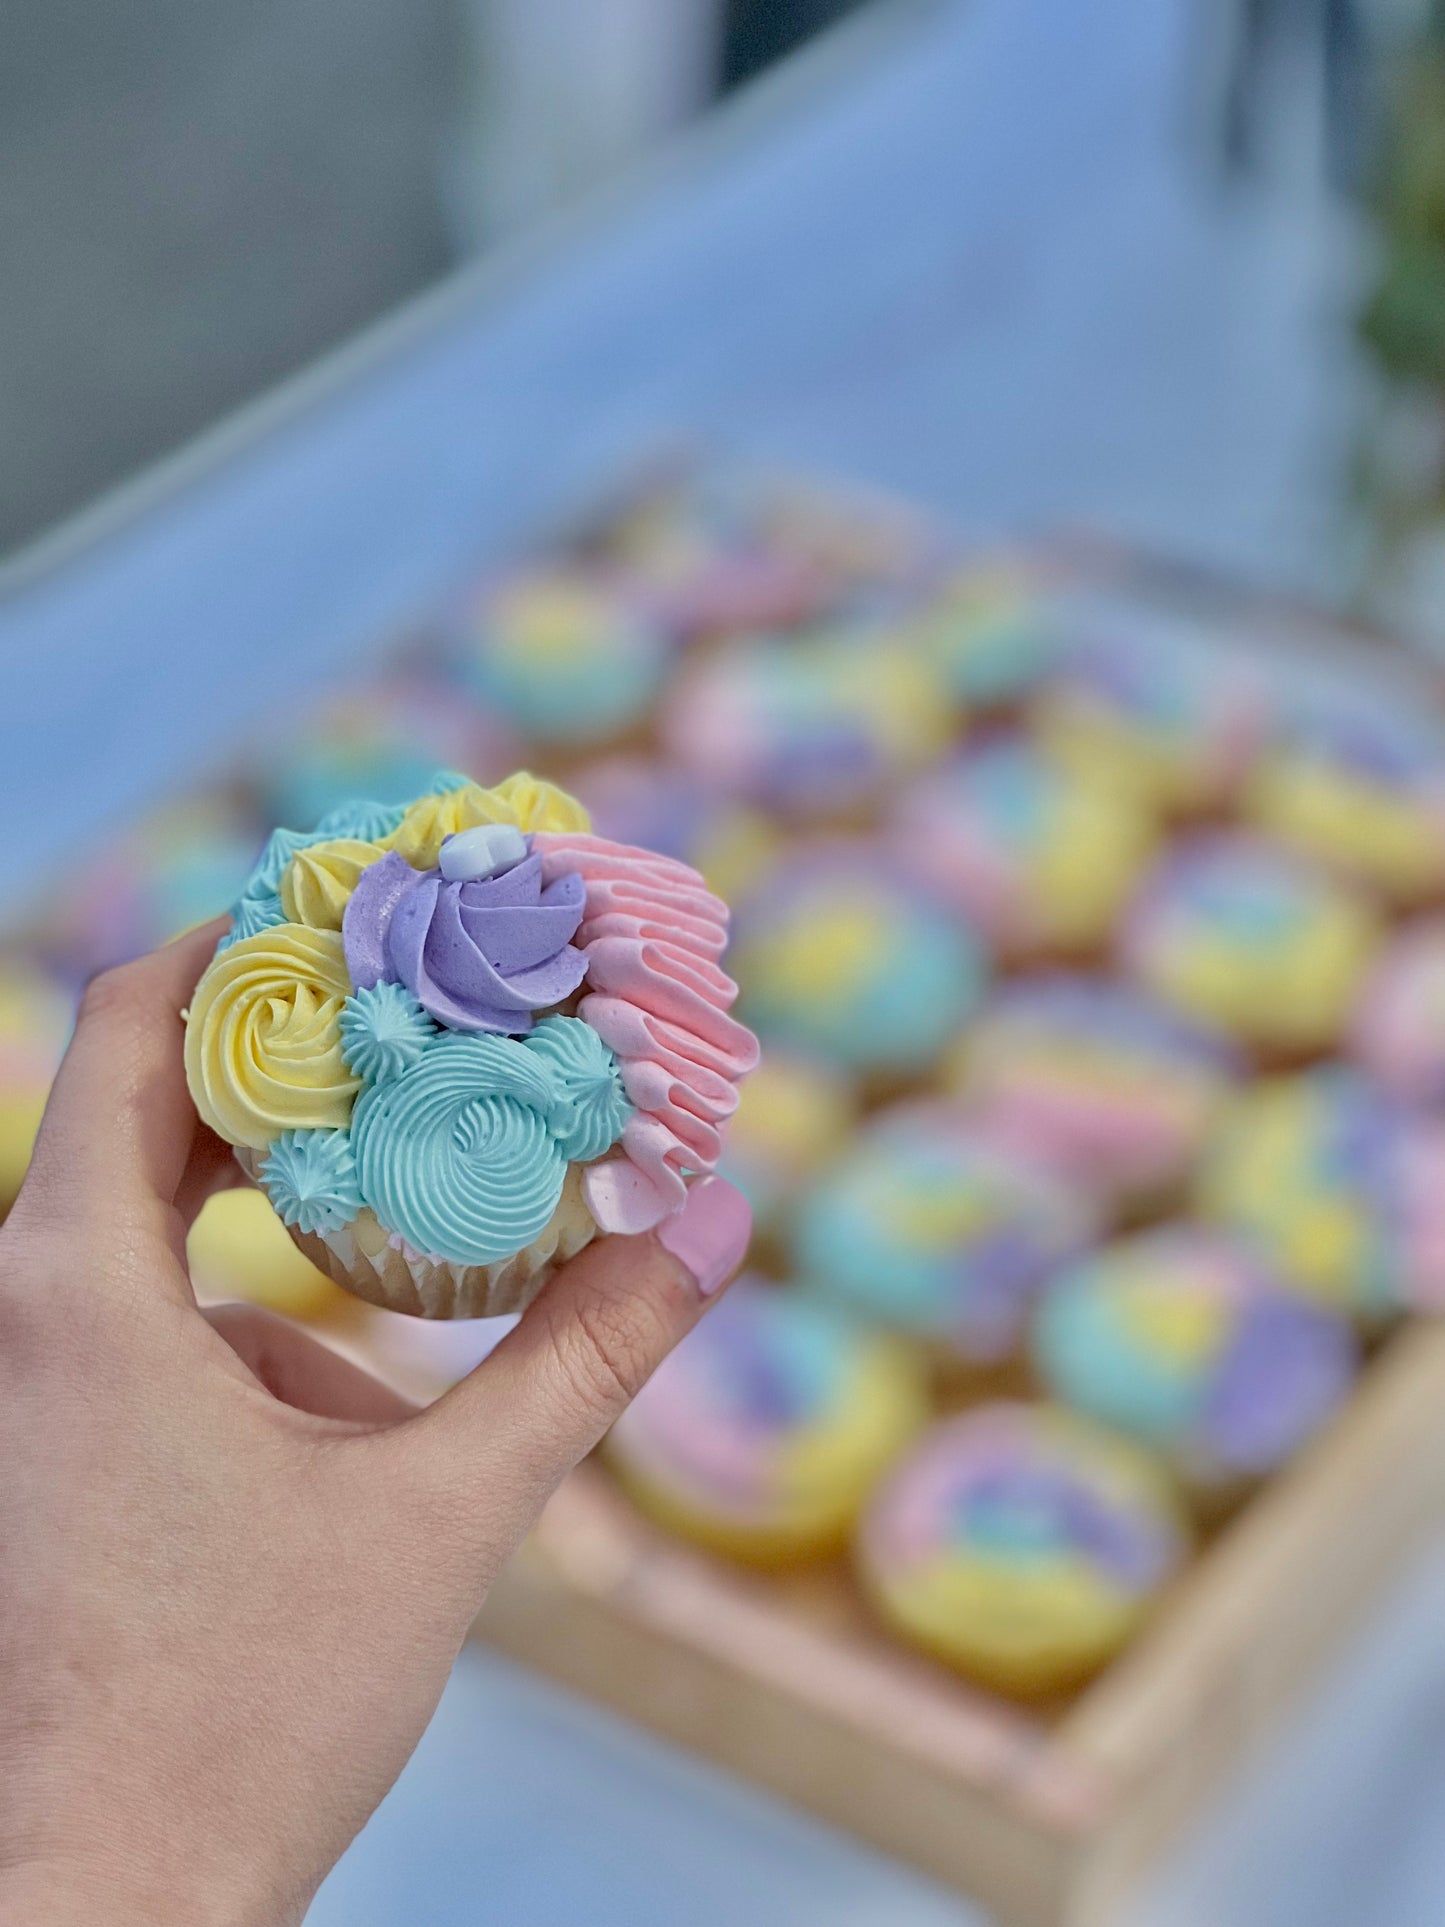 Surprise Cupcake with Filling - Gender Reveal